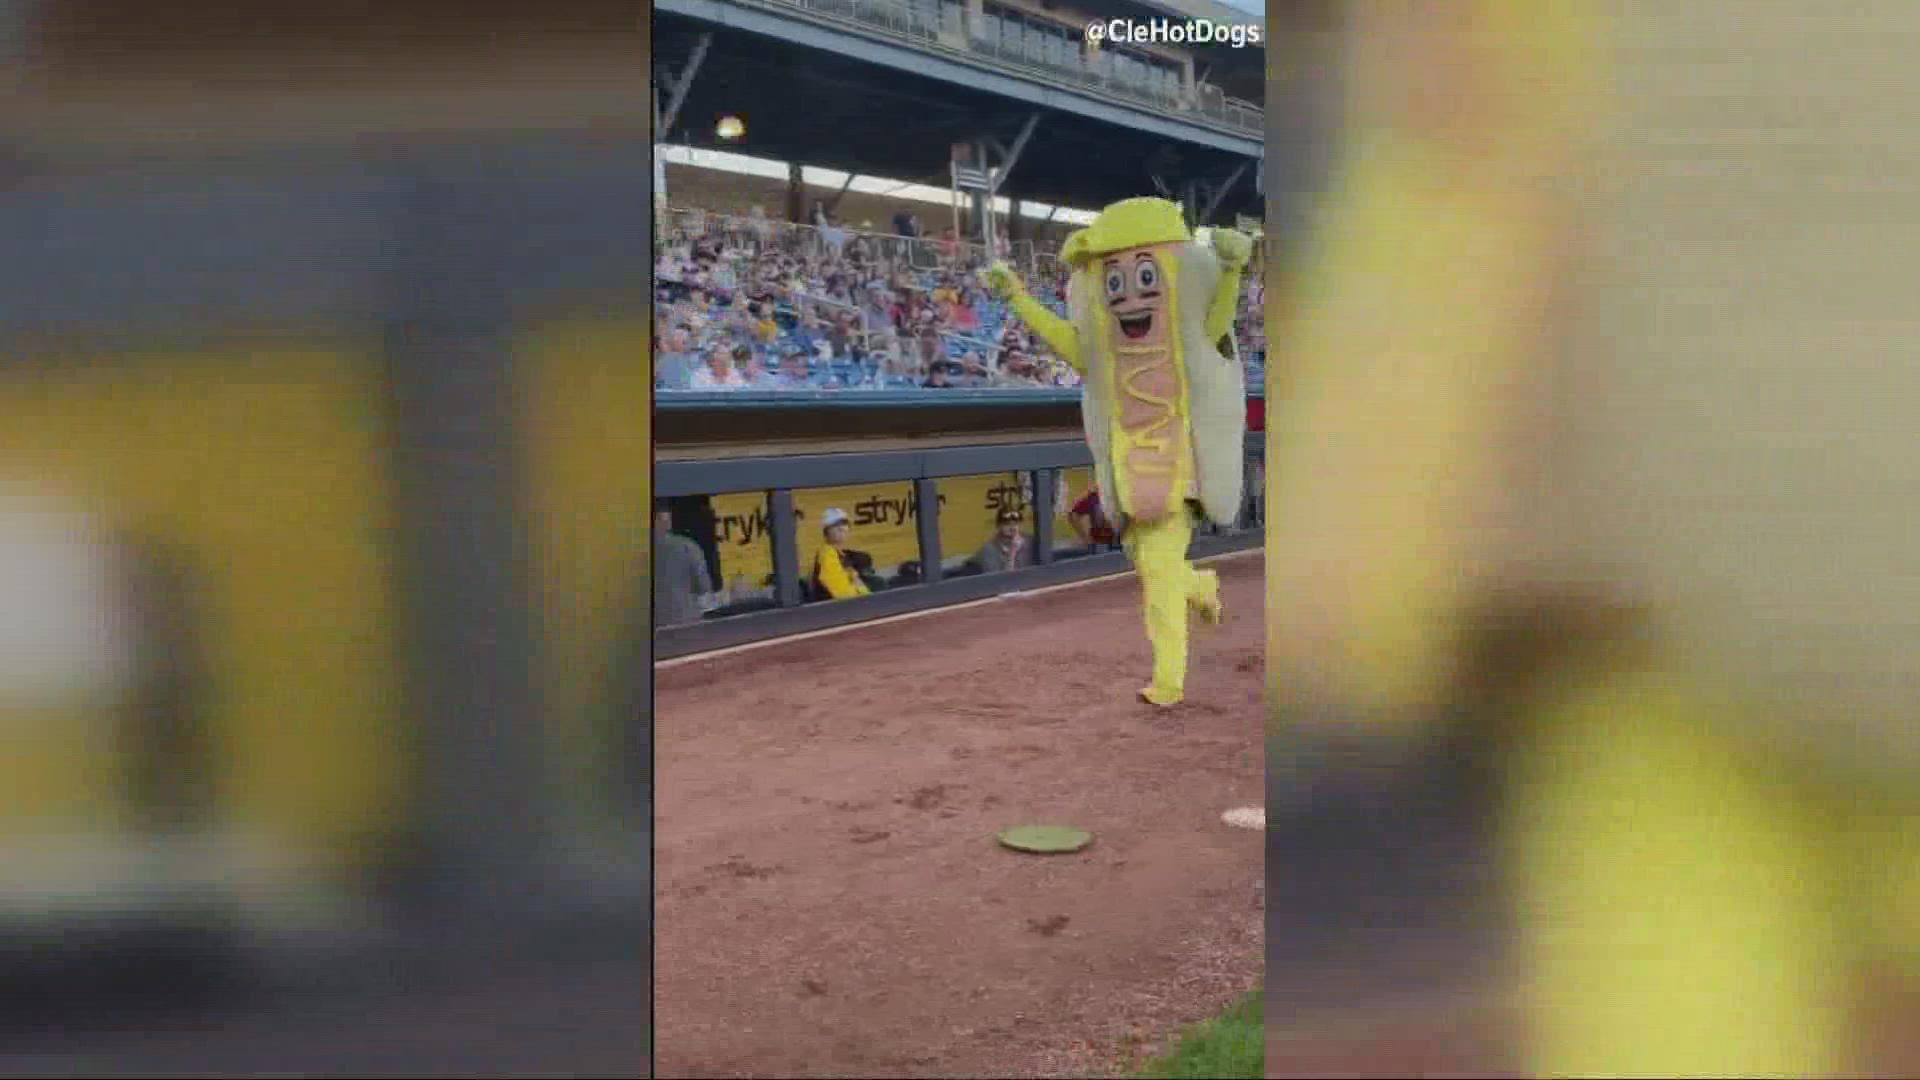 Like many of the best redemption stories in sports, The Cleveland Guardians' racing hot dog Mustard took the first step forward after hitting rock bottom.